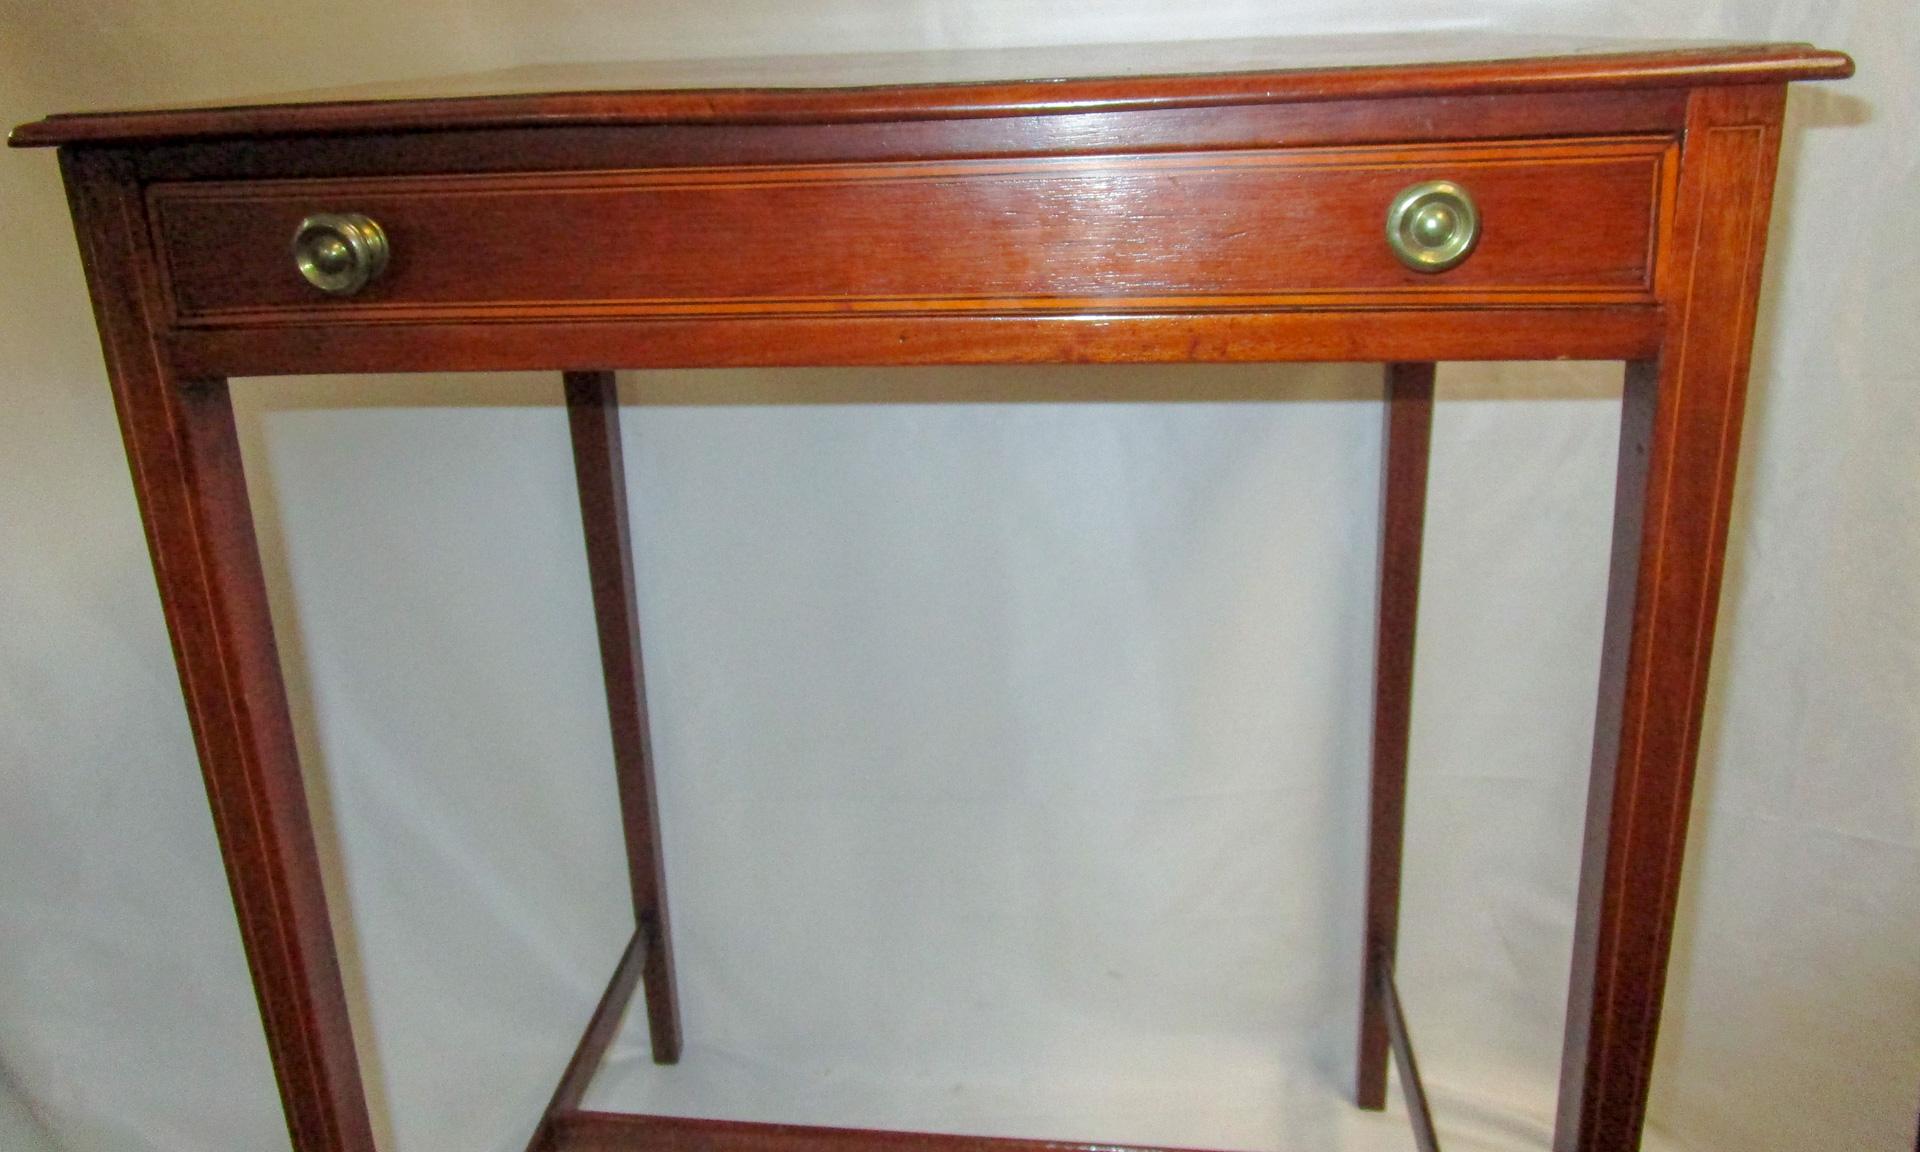 Brass English Hepplewhite Mahogany Side Table w/ Shell Motif Inlay in Center & Corners